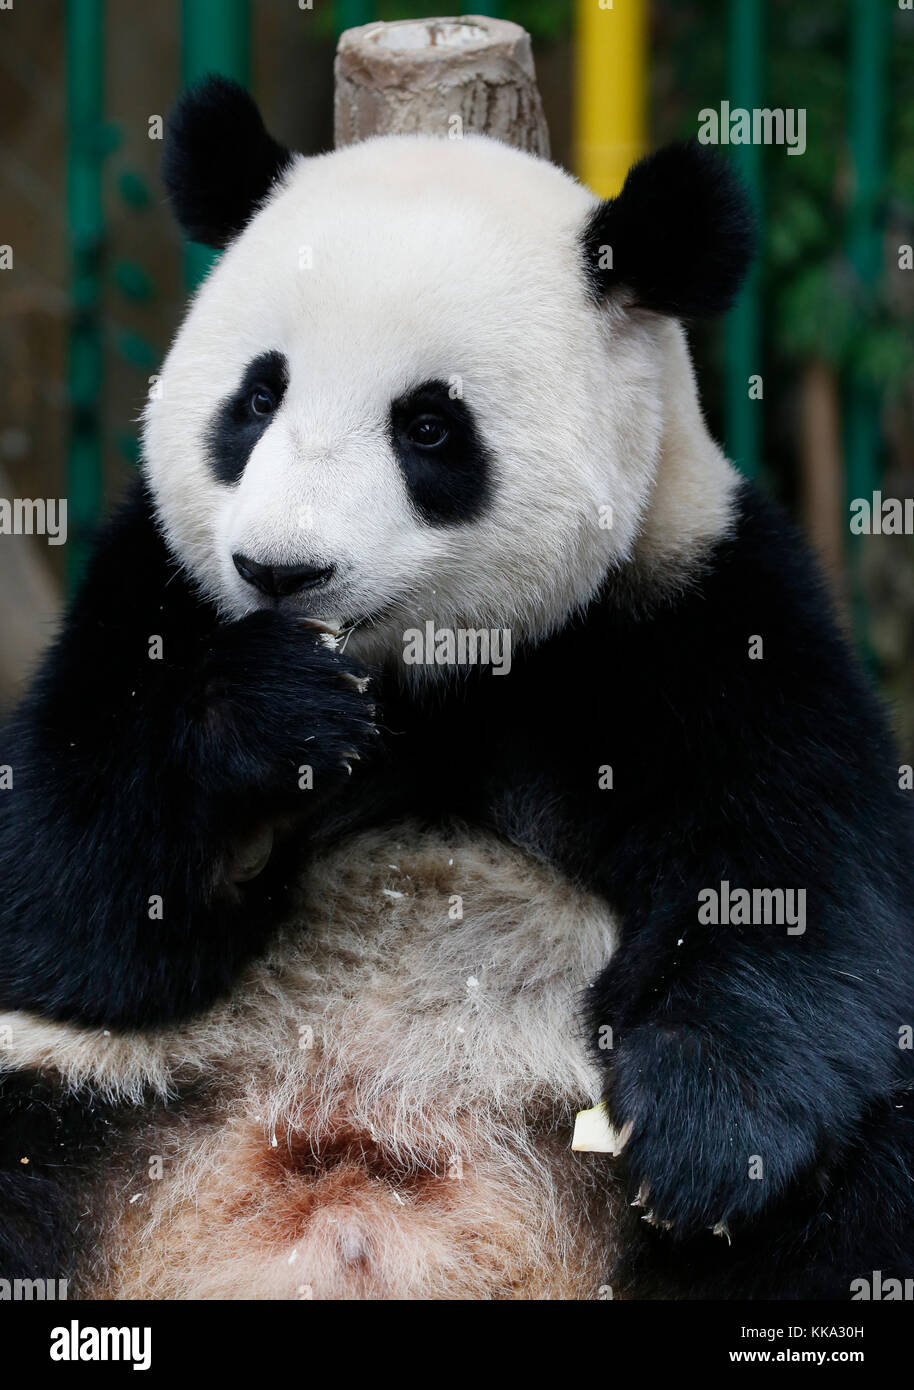 Nuan Nuan (means warmth), the first Malaysian-born Panda cub is sitting on the wooden bench at the Panda Conservation Centre in Kuala Lumpur, Malaysia Stock Photo